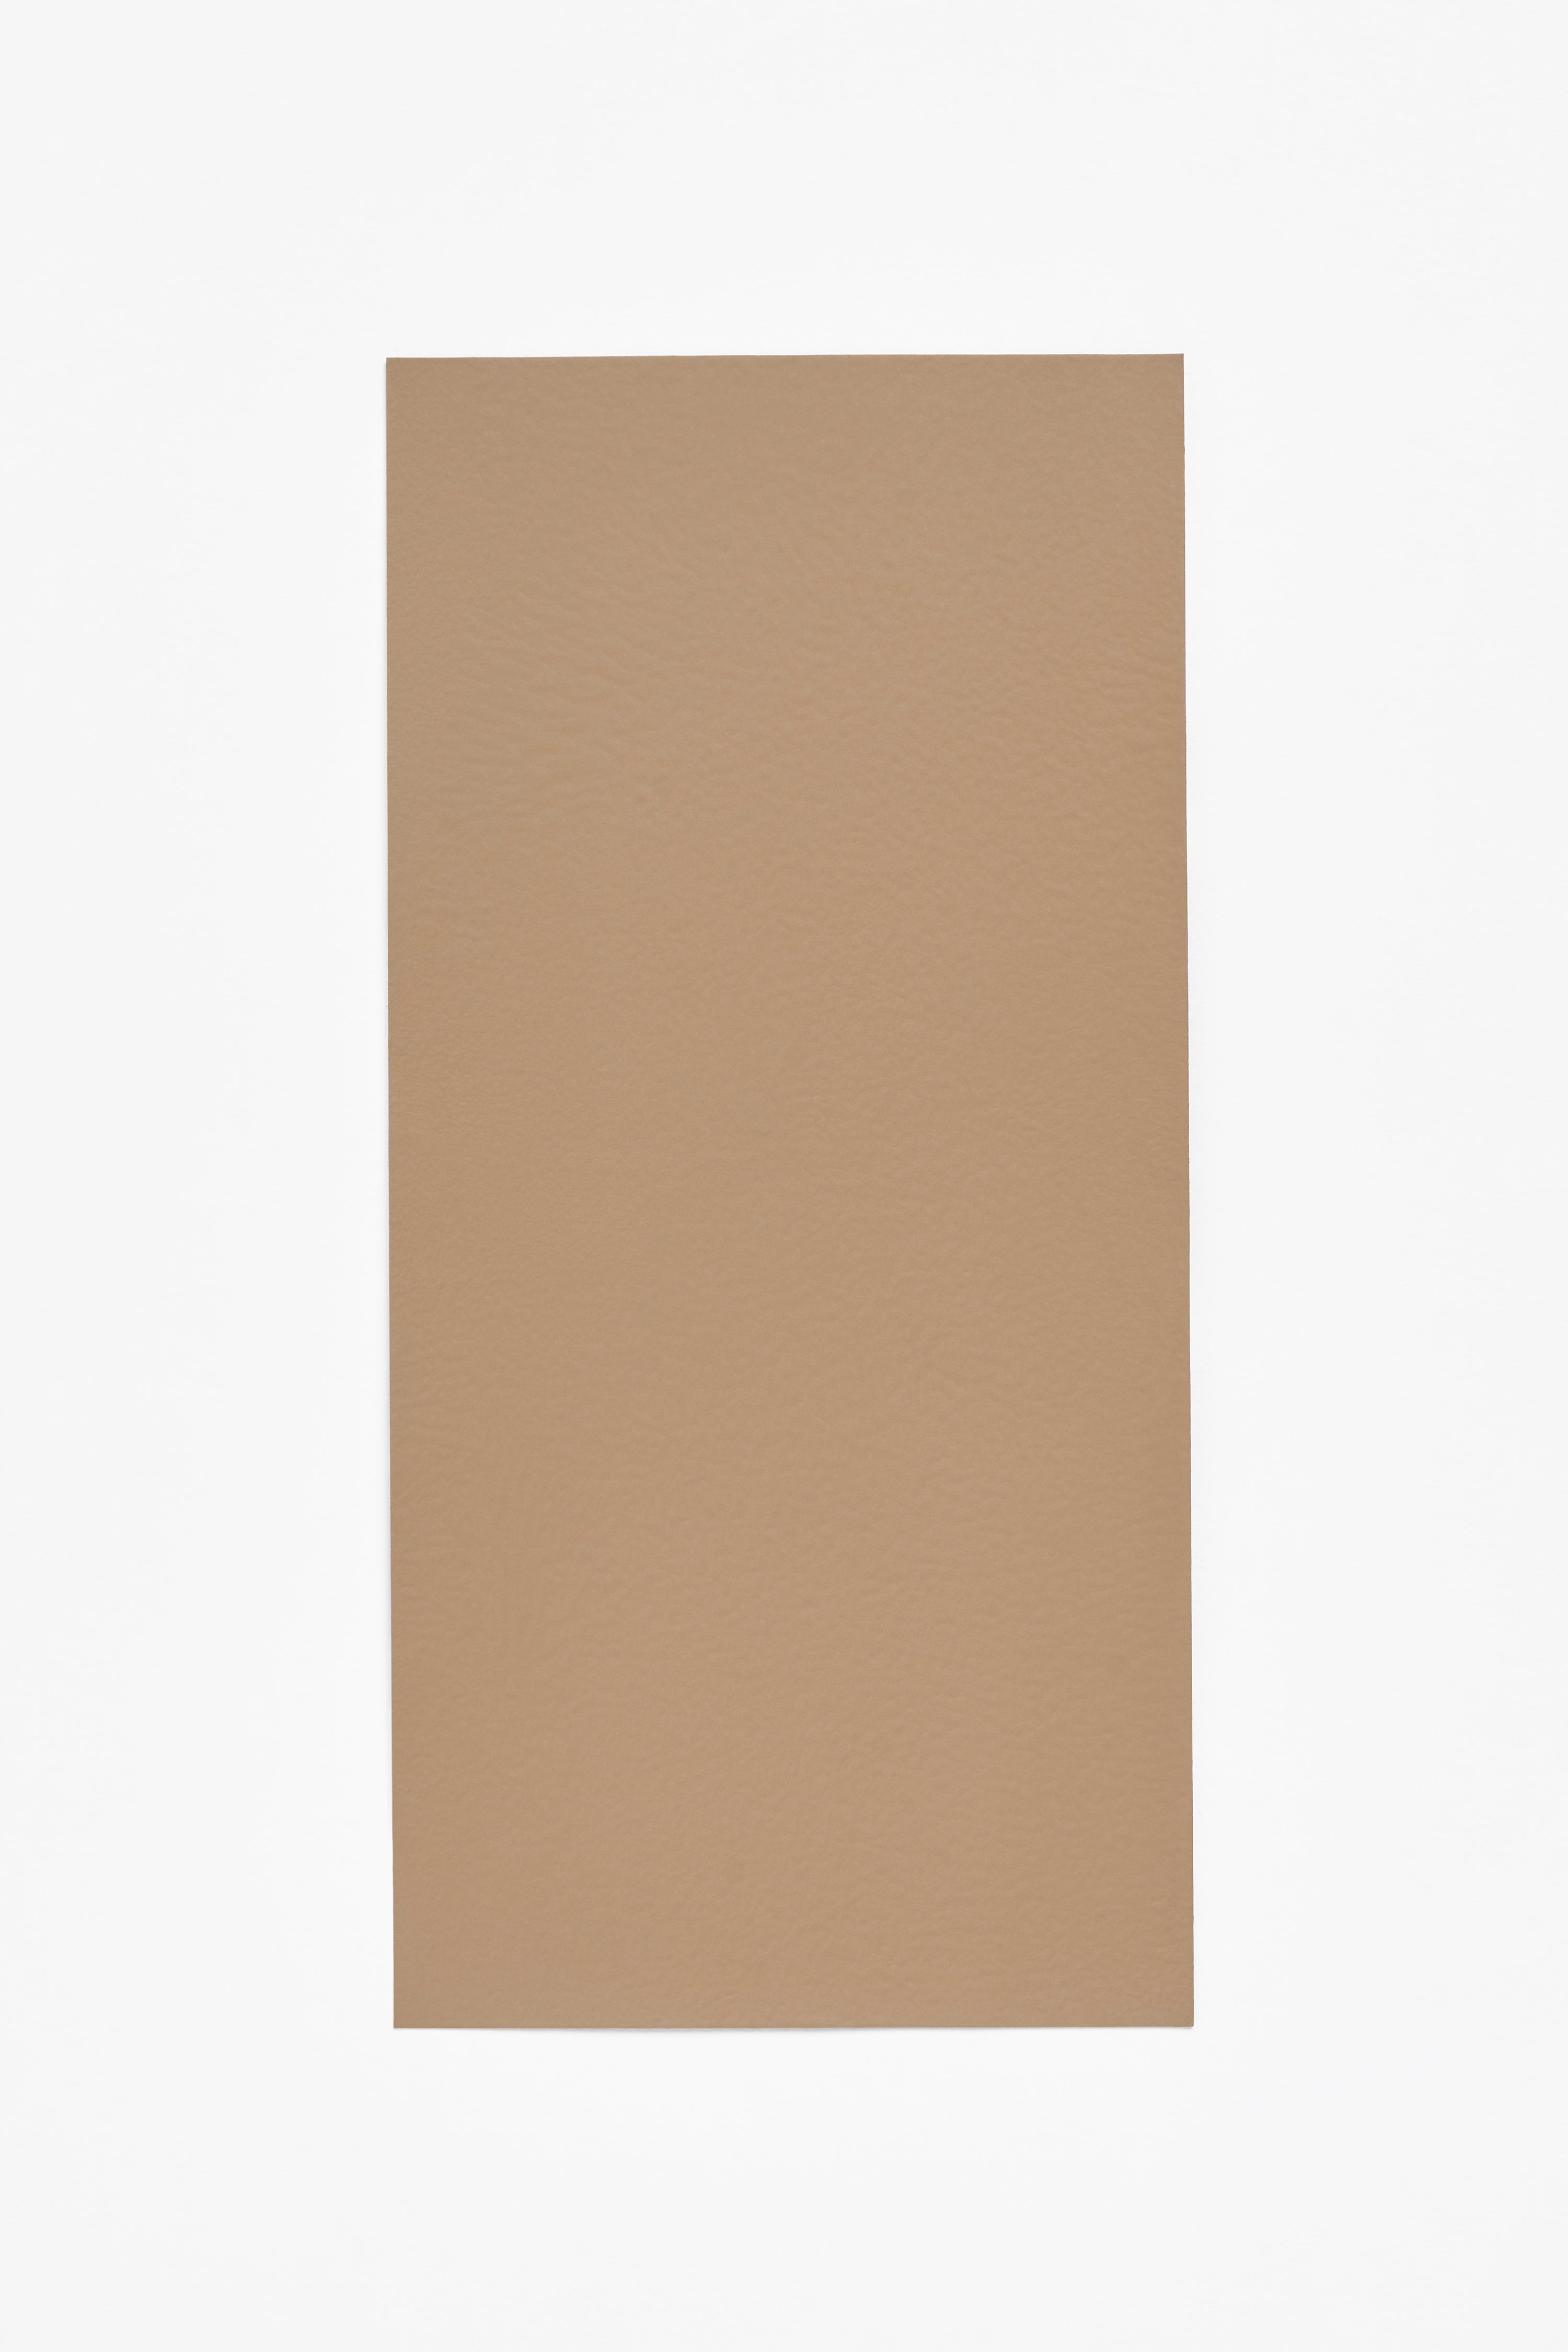 Rammed Earth — a paint colour developed by Norm Architects for Blēo